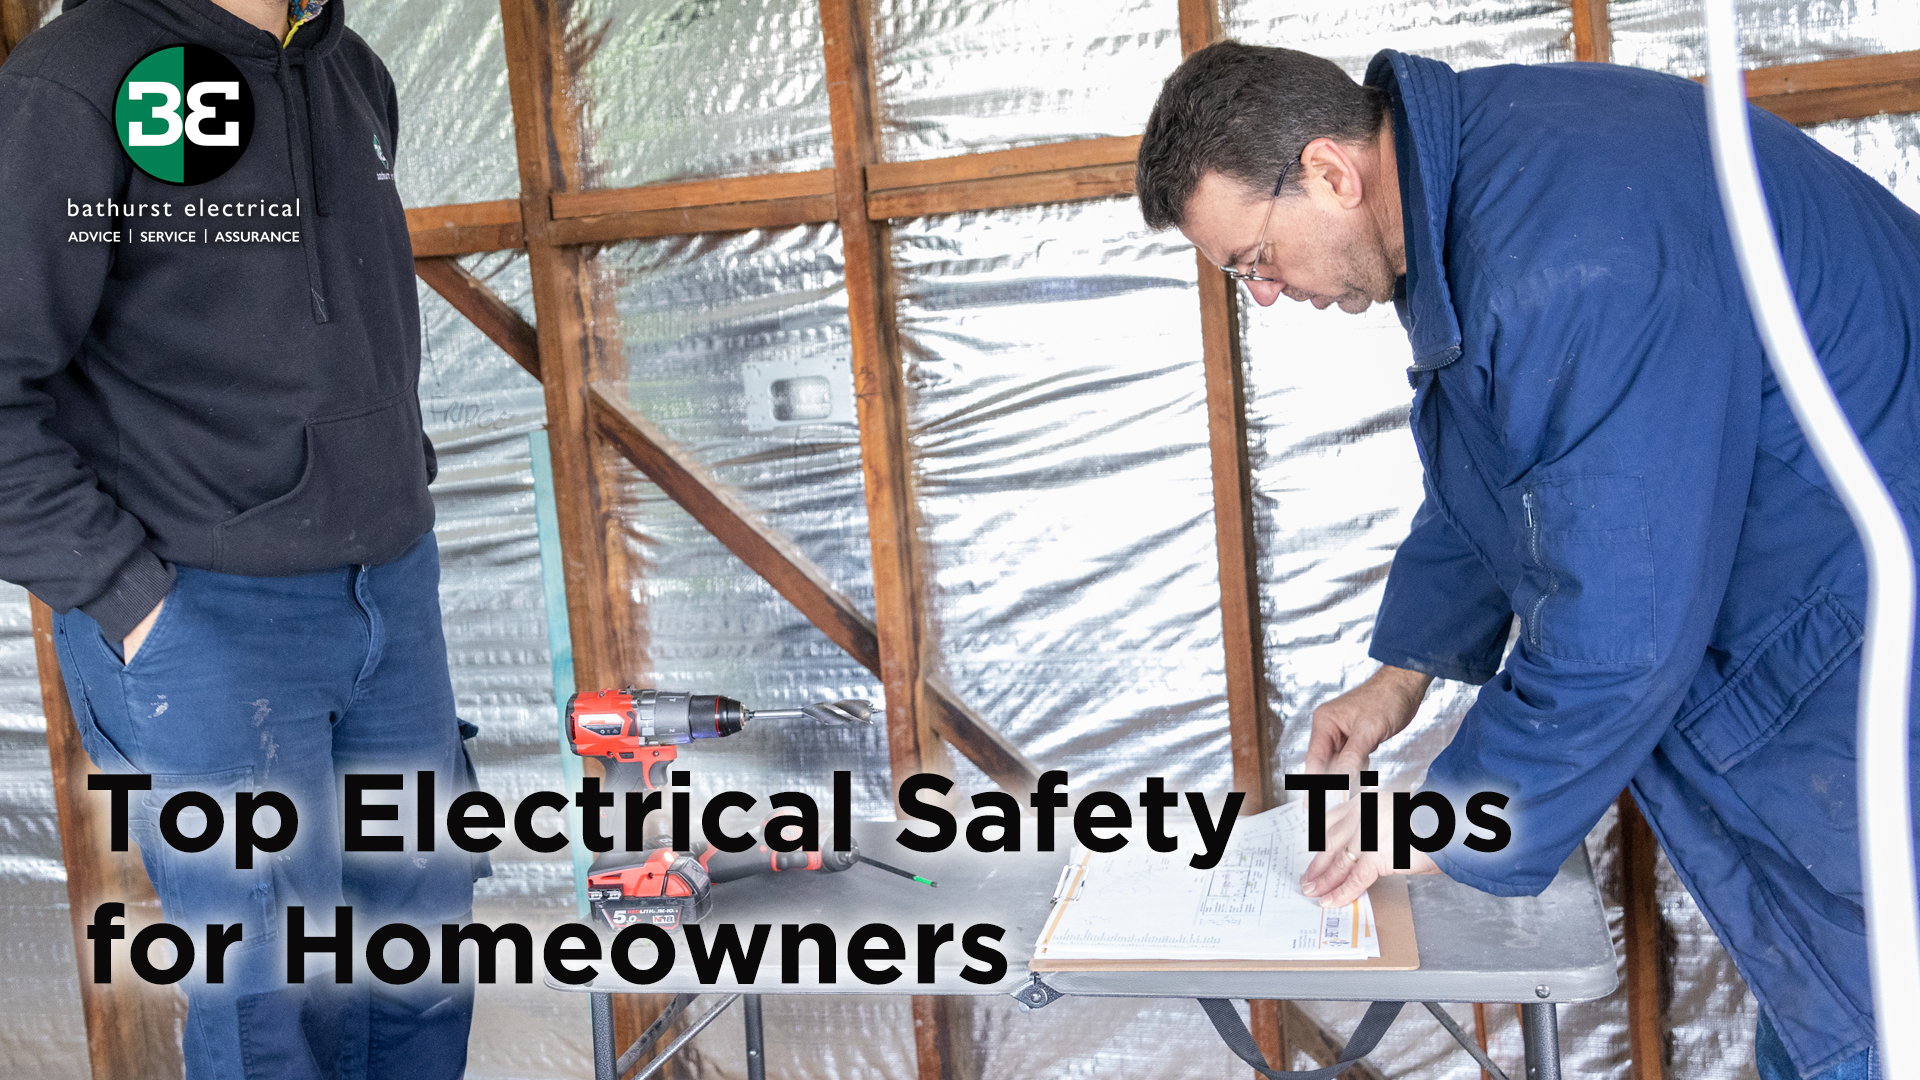 Top Electrical Safety Tips for Homeowners